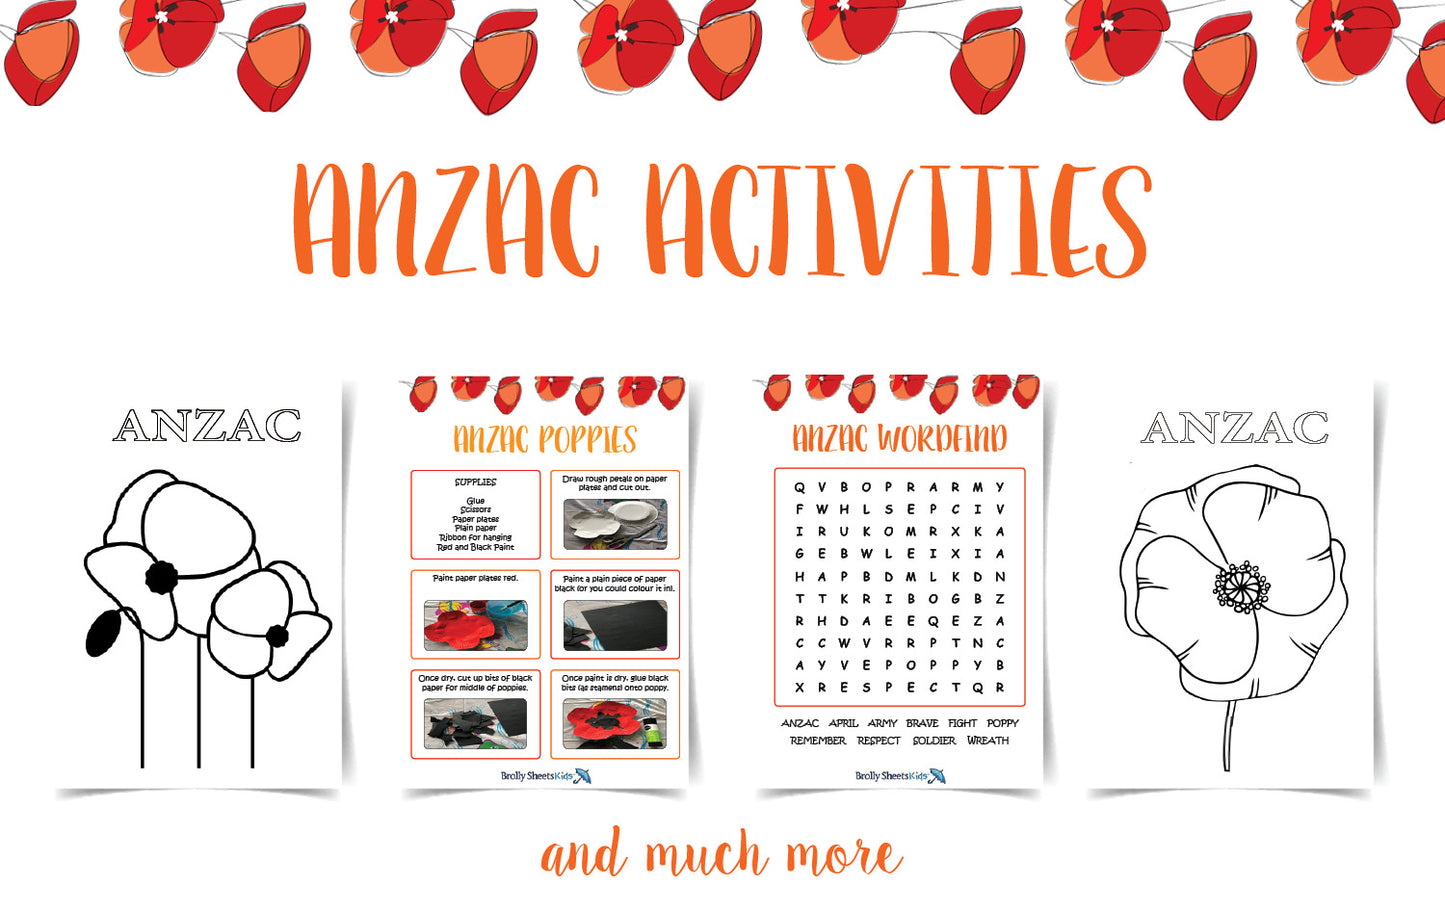 ANZAC Day Activities - Brolly Sheets NZ